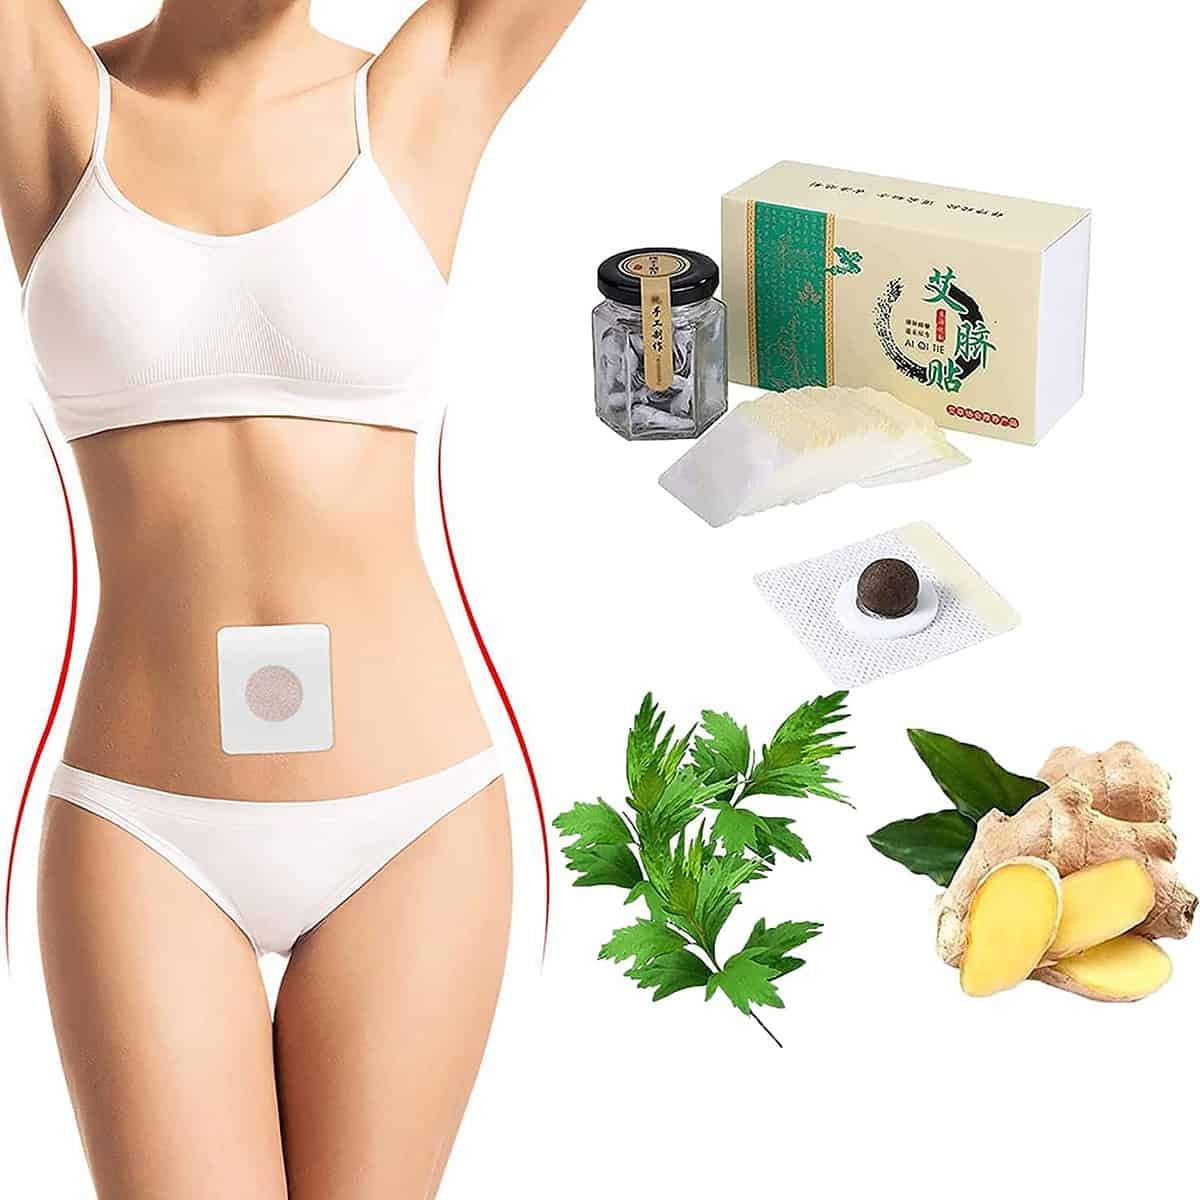 Mugwort Belly Patch, Natural Wormwood Essence Pills and Belly Sticker